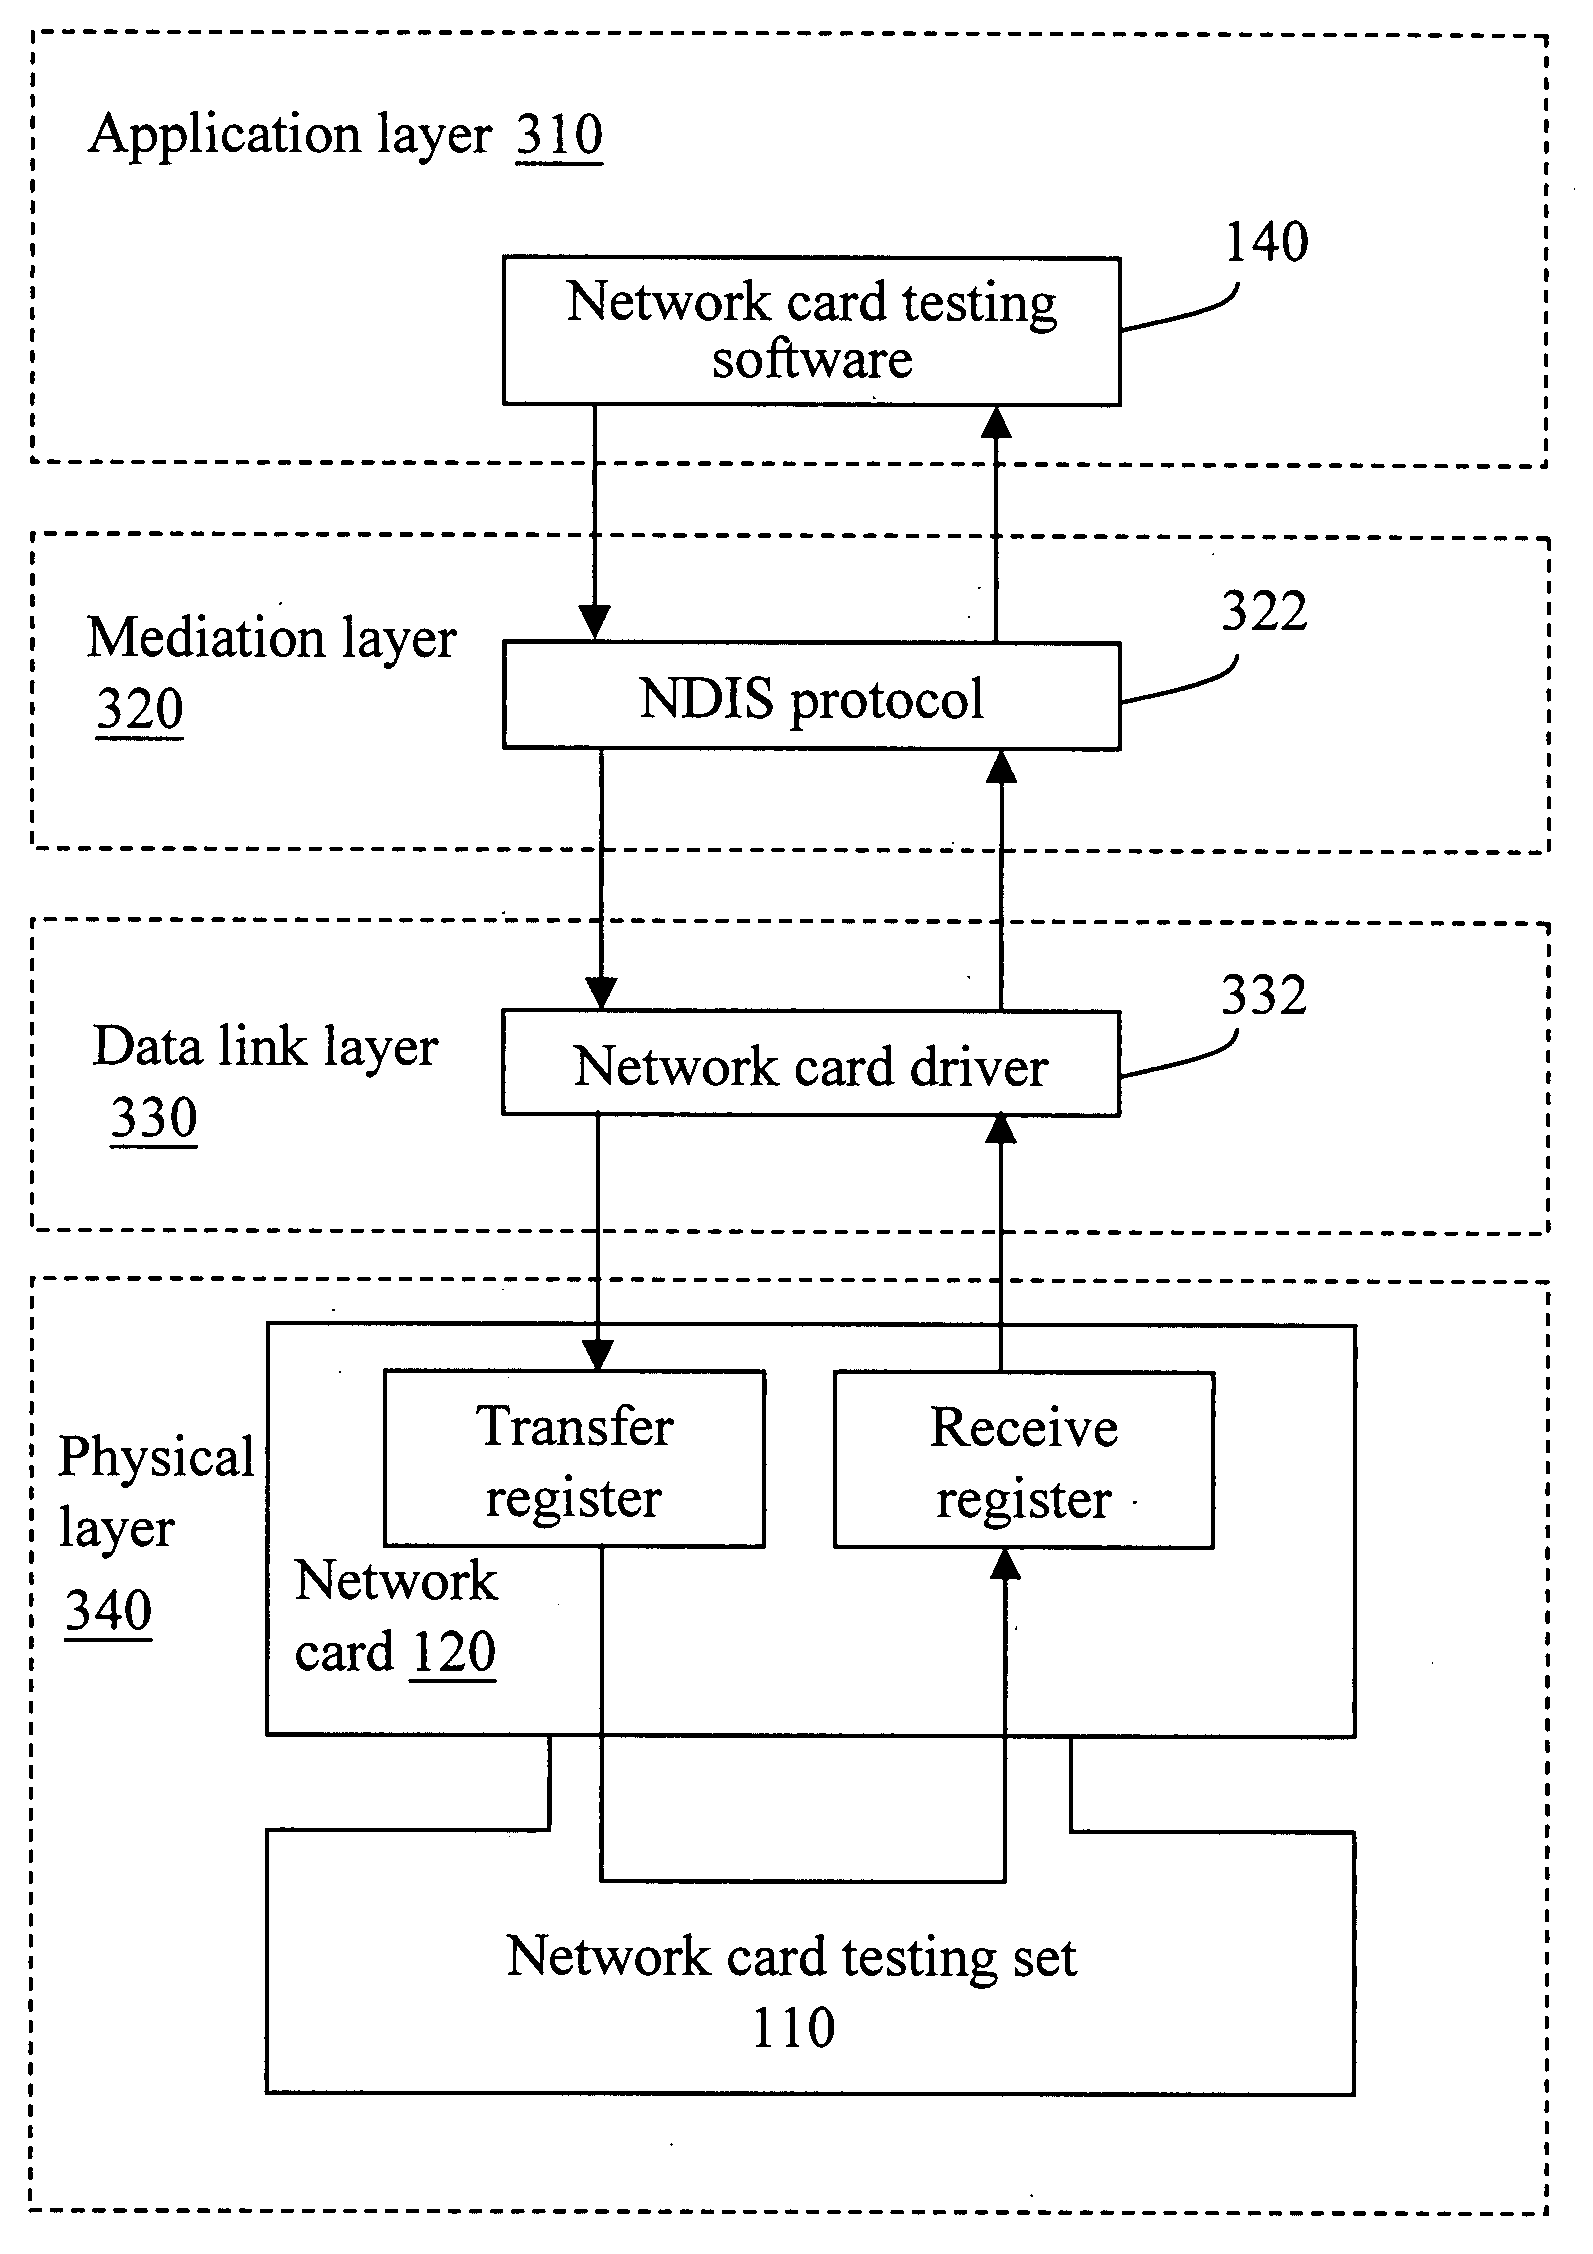 Network card testing system